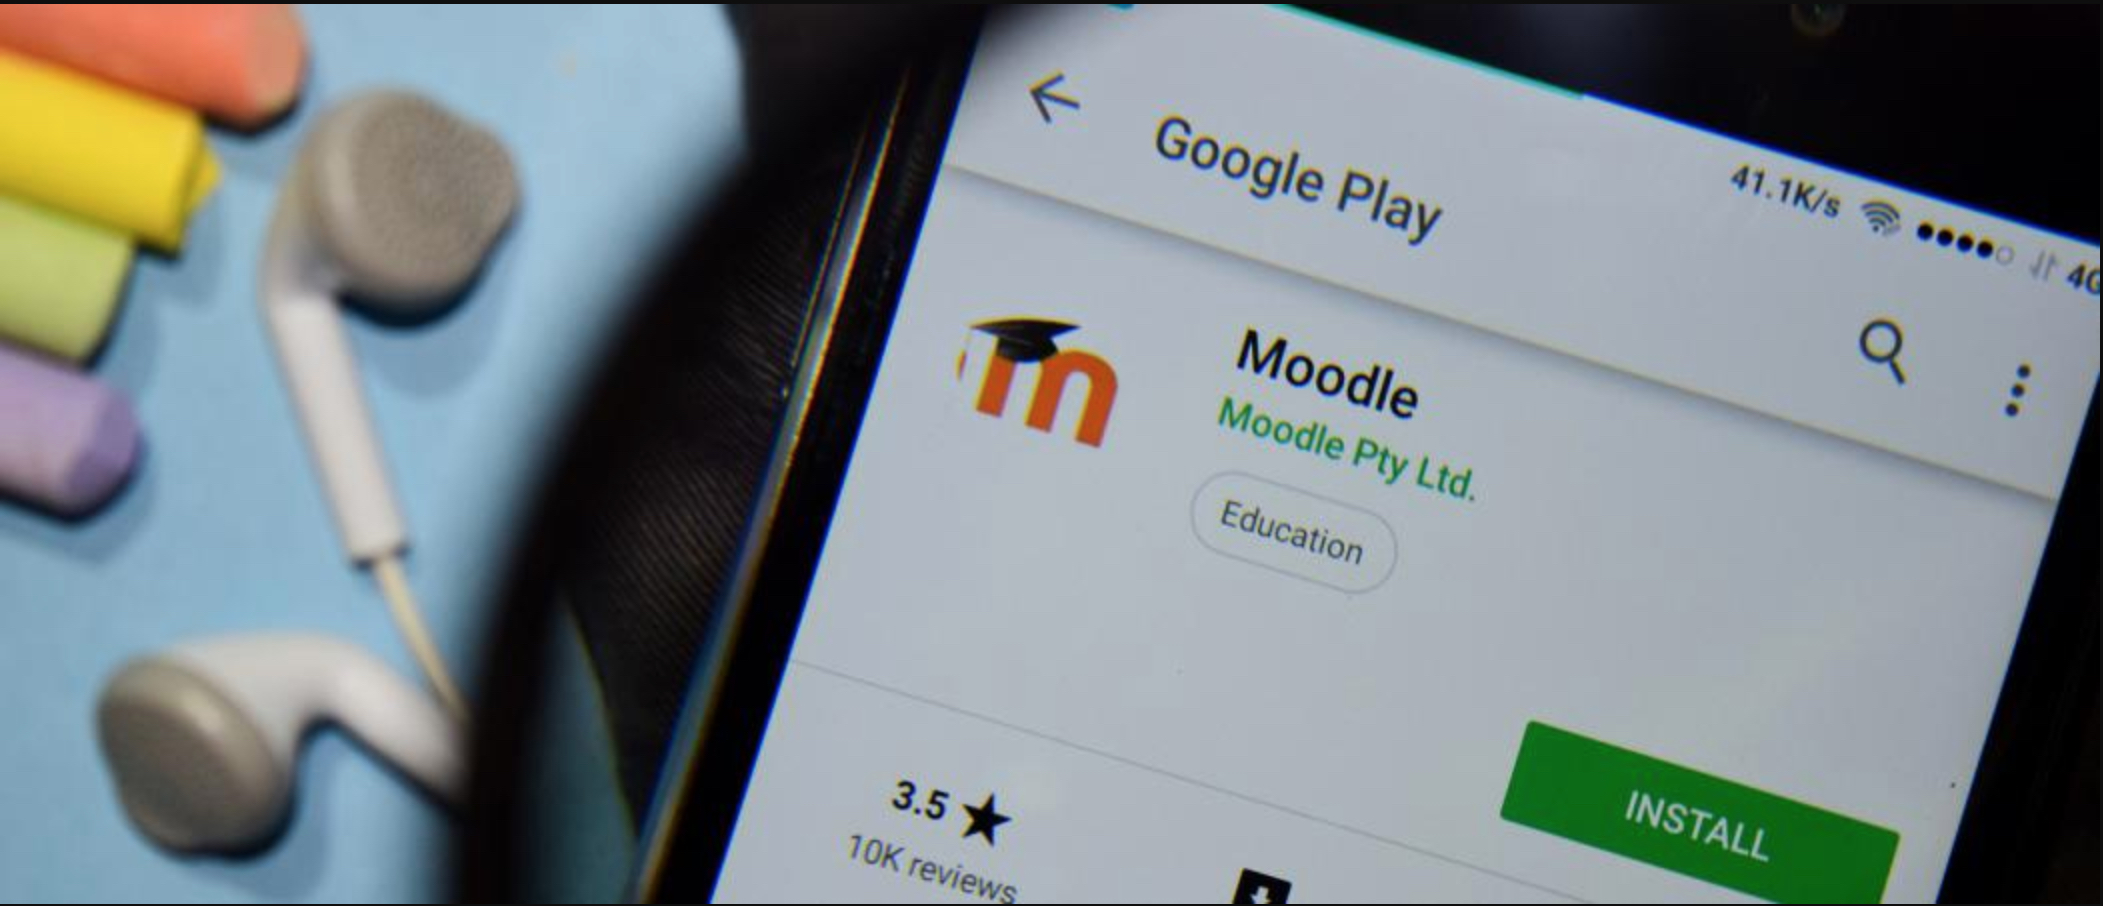 Image shows the "Moodle" app on a cell phone